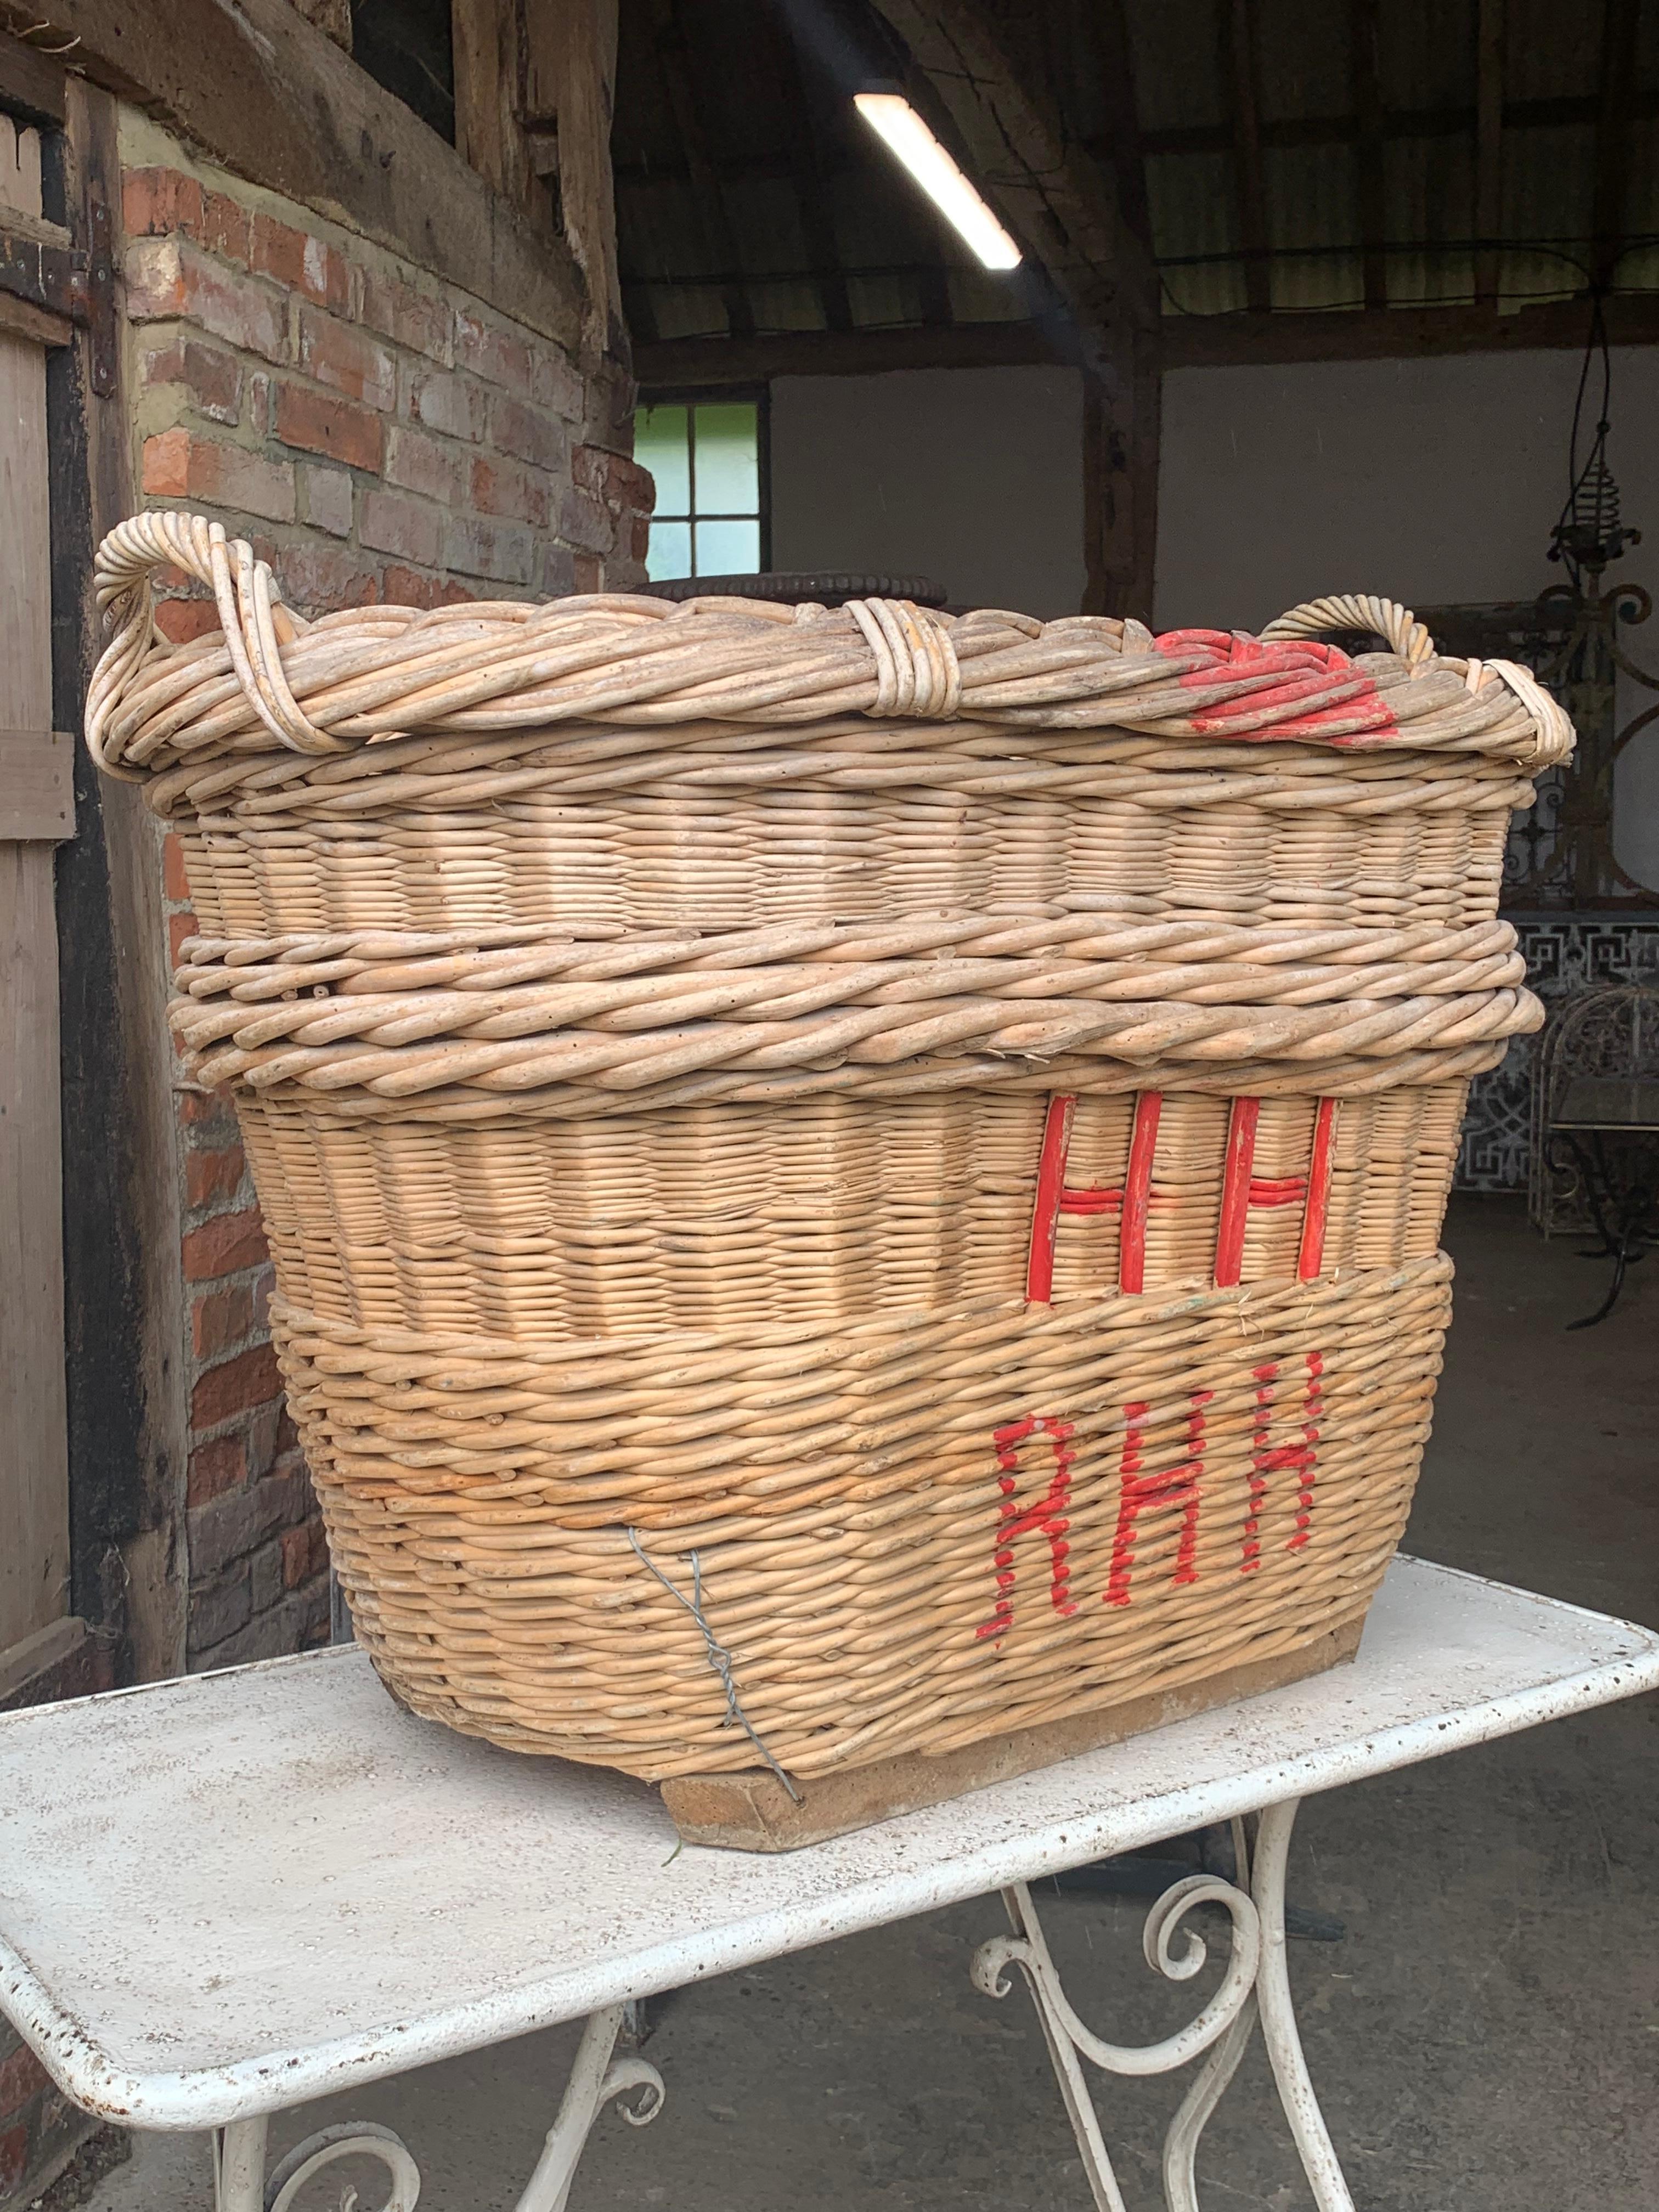 A nice large early 20th century French Champagne grape harvesting basket with the painted markings of the vineyard owner. These were used to harvest the grapes in the vineyards but now make nice decorative and useful baskets.

In good solid